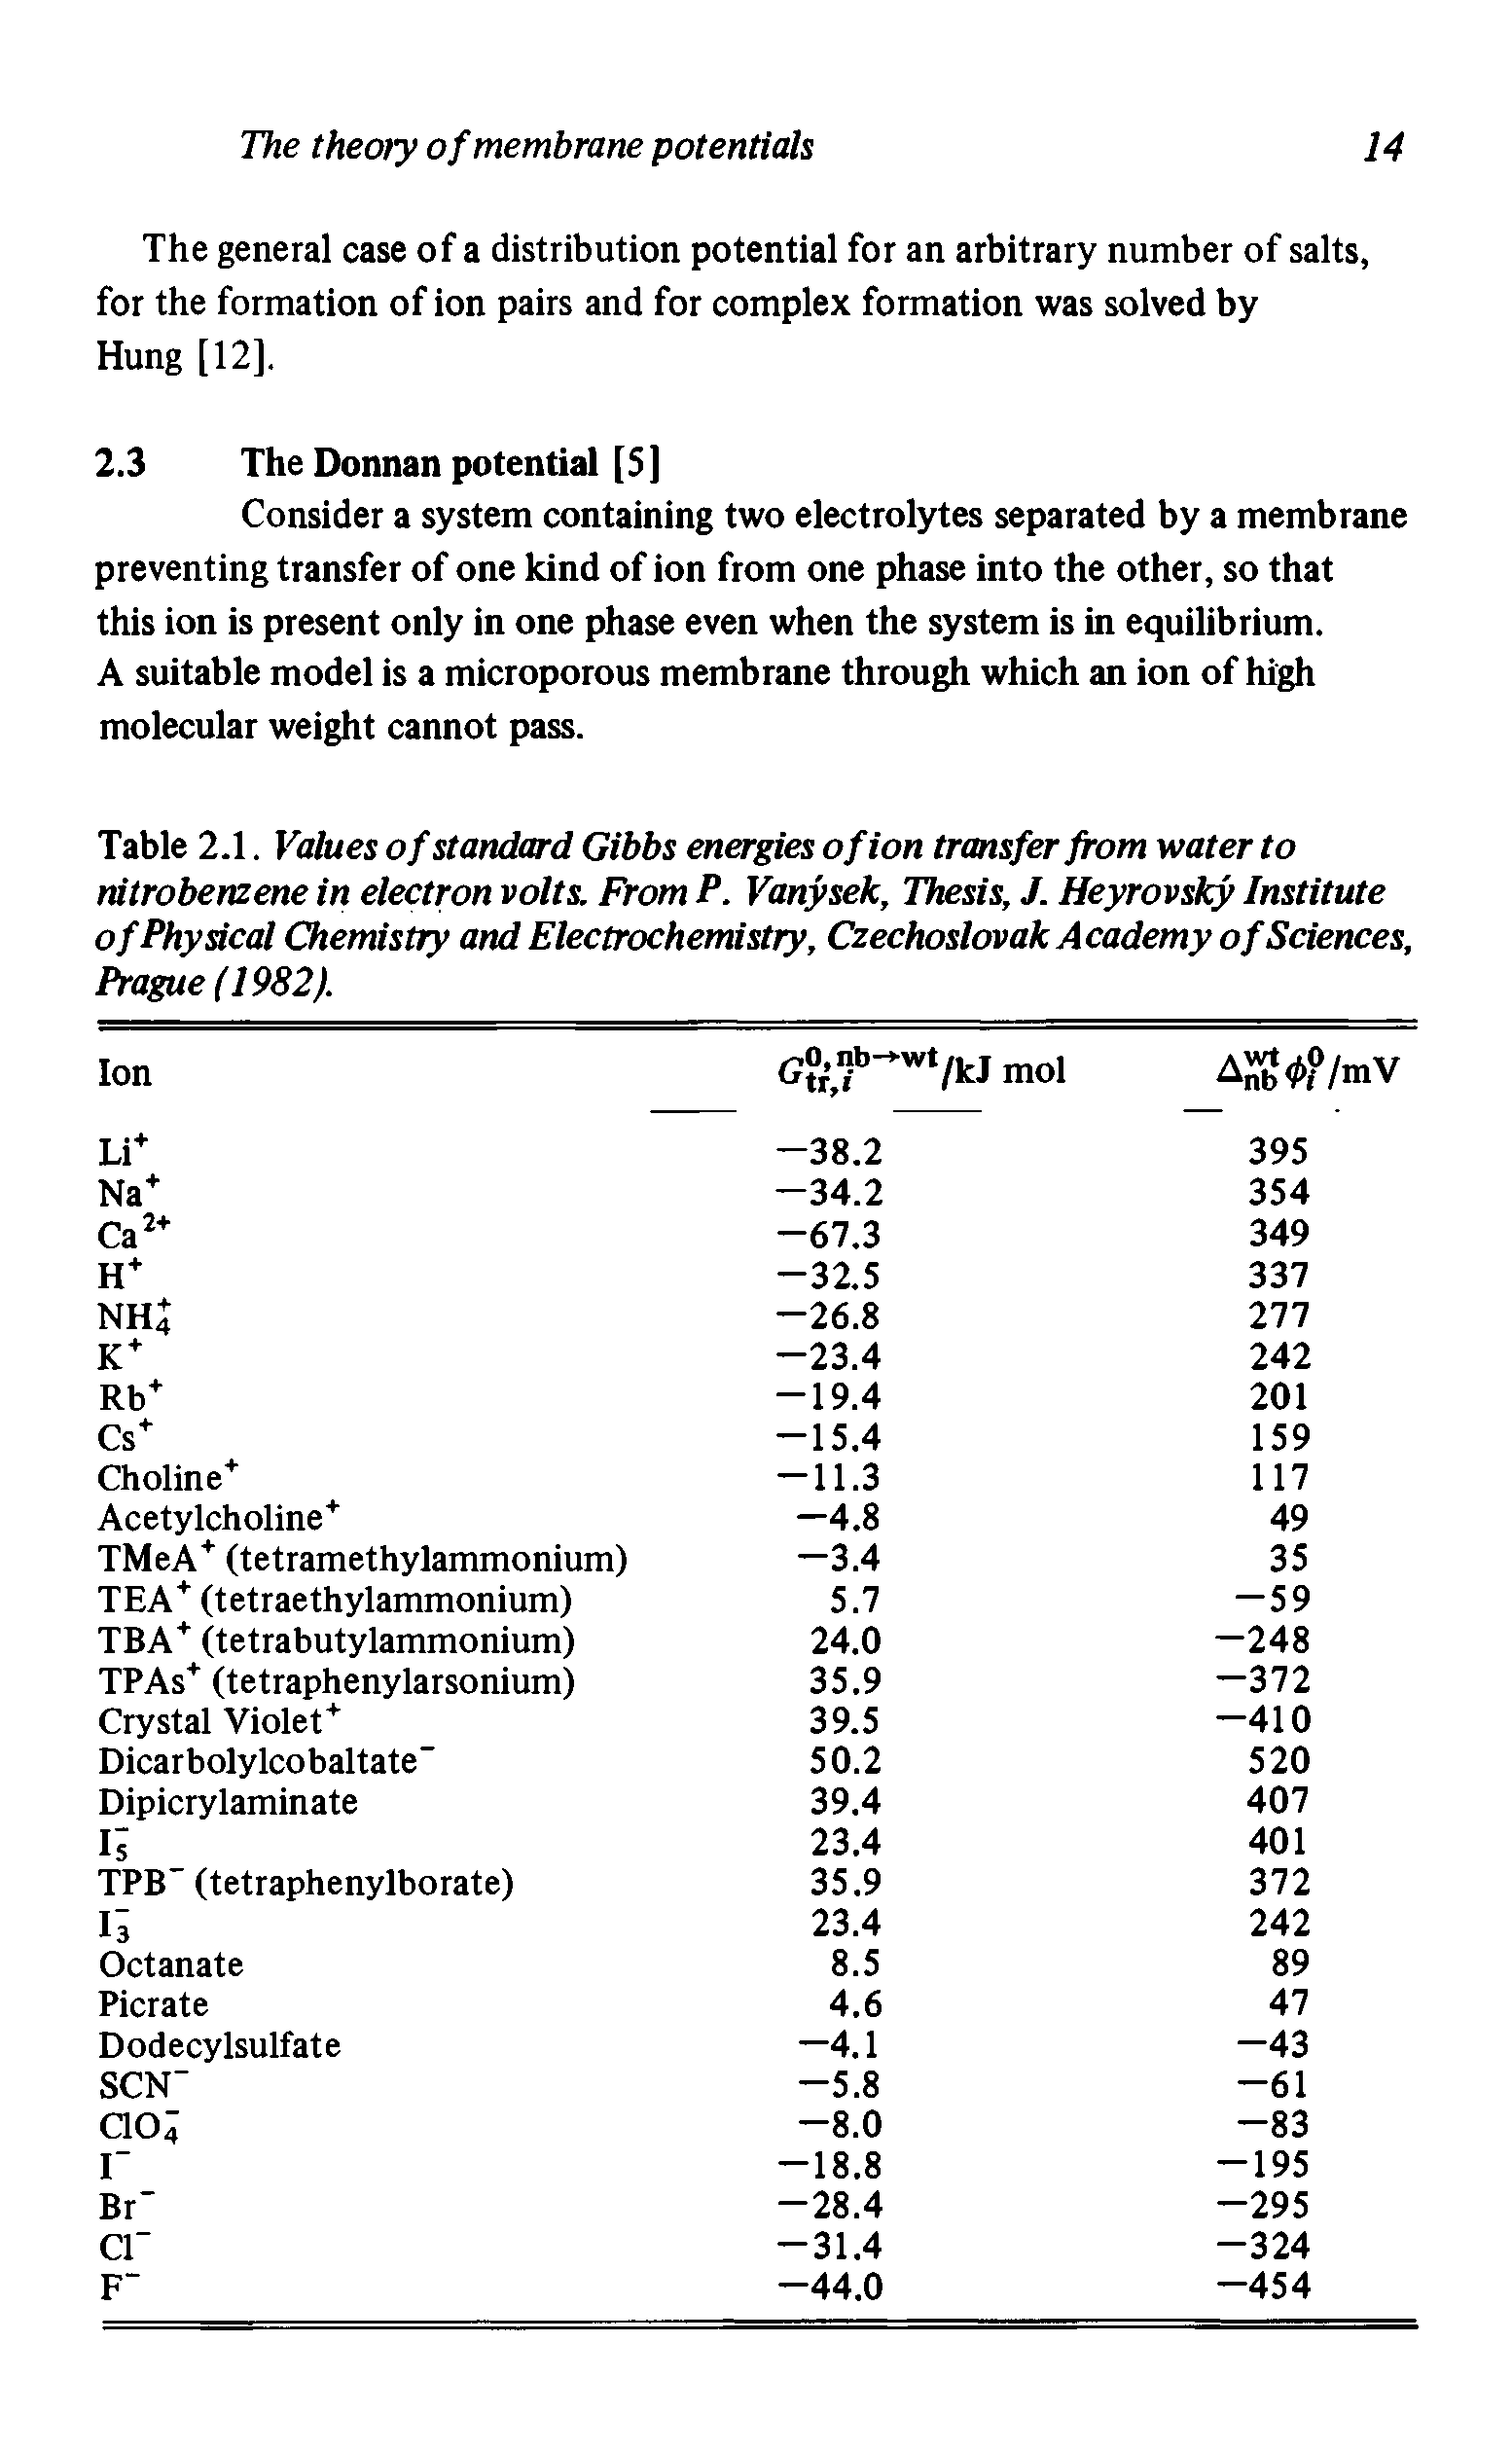 Table 2.1. Values o f standard Gibbs energies of ion transfer from water to nitrobenzene in electron volts. From P. Vanysek, Thesis, J. Heyrovsky Institute of Physical Chemistry and Electrochemistry, Czechoslovak Academy of Sciences, Prague (1982).